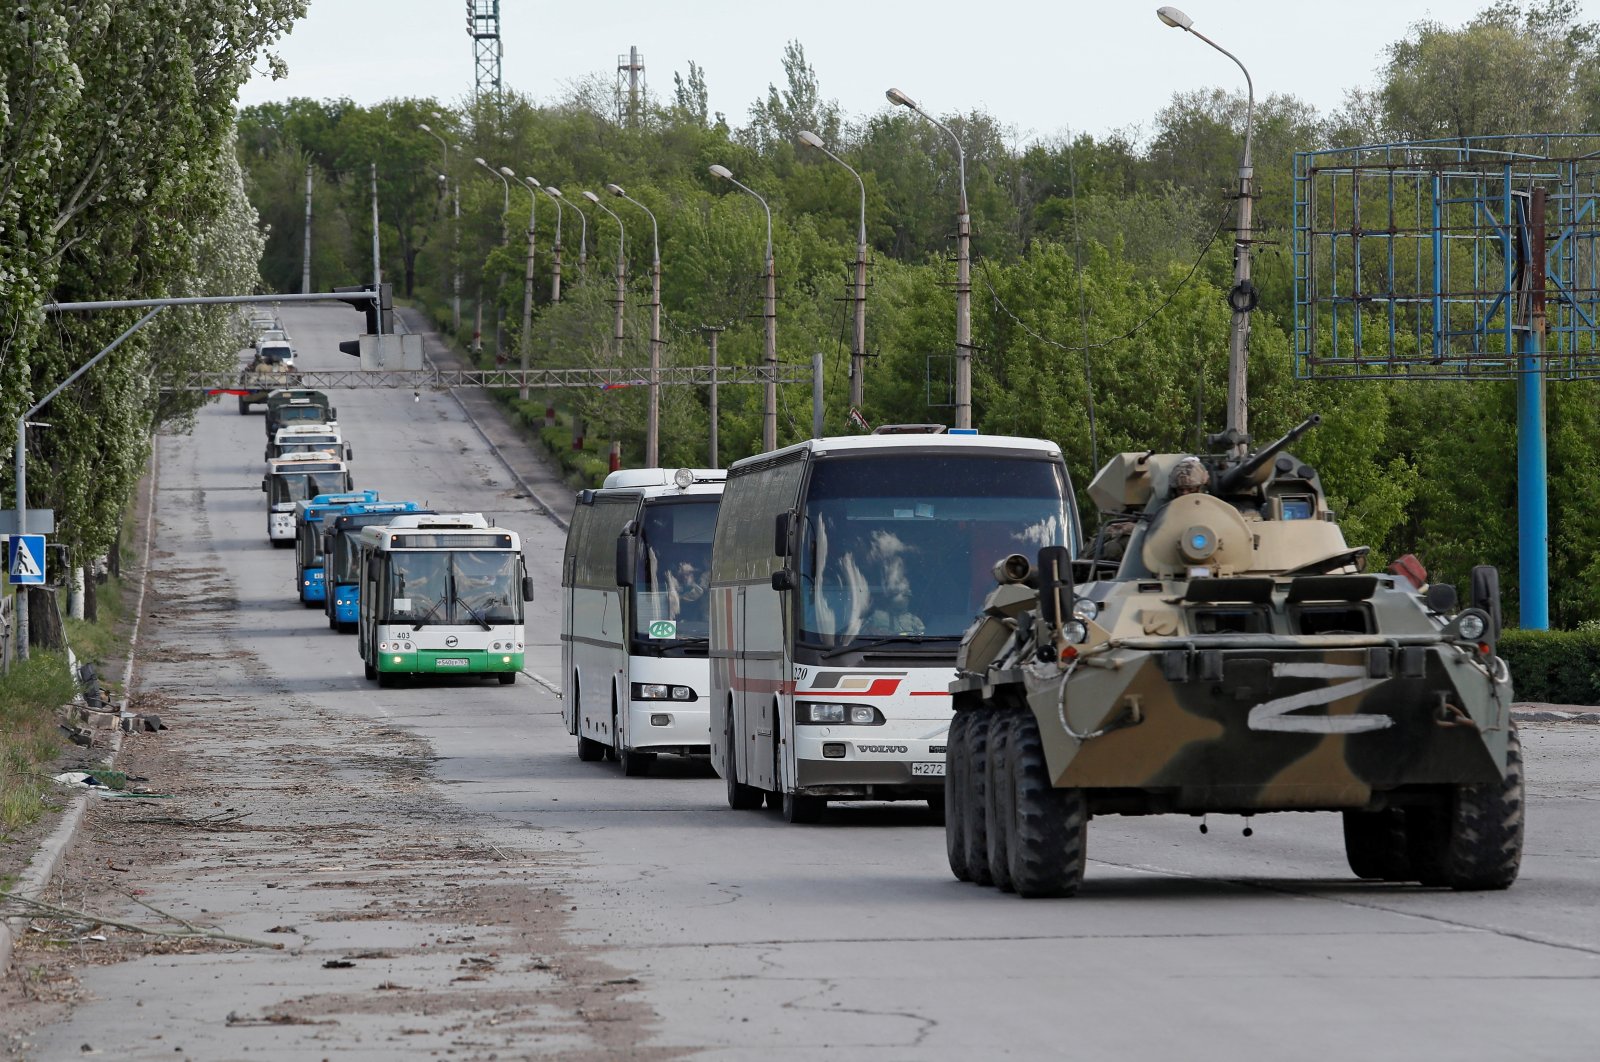 Buses carrying Ukrainian forces who have surrendered after weeks holed up at the Azovstal steelworks drive away under the escort of the pro-Russian military forces in the course of the Ukraine-Russia conflict in Mariupol, Ukraine, May 17, 2022. (REUTERS Photo)